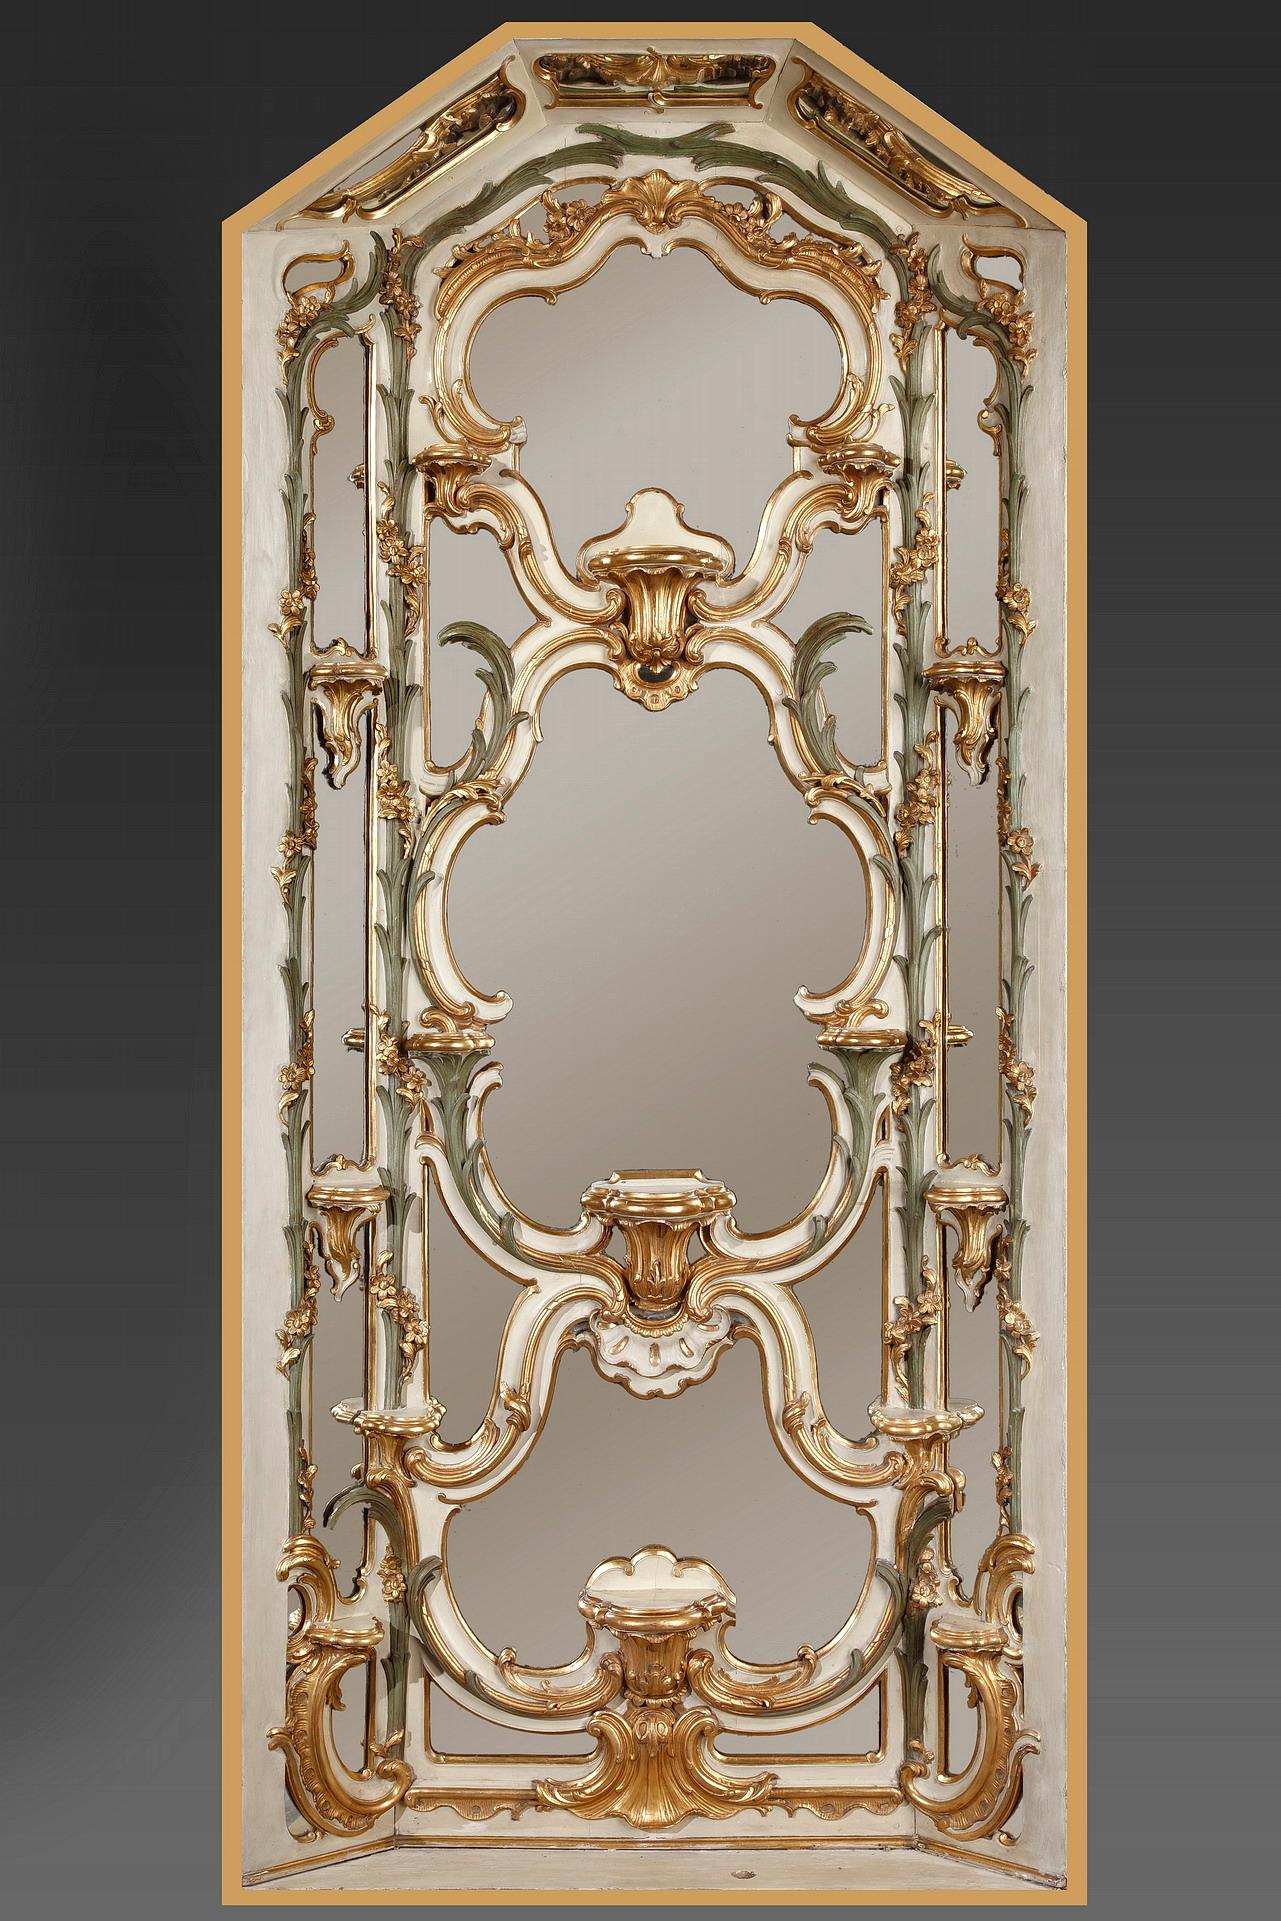 Provenance: Rome, Palazzo Fendi, Via del Corso

A very rare pair of foliate carved and green-lacquered corner panels with mirror. Carved patterns are in Louis XV curved style and divide the mirrors in three parts, enriched with variated consoles